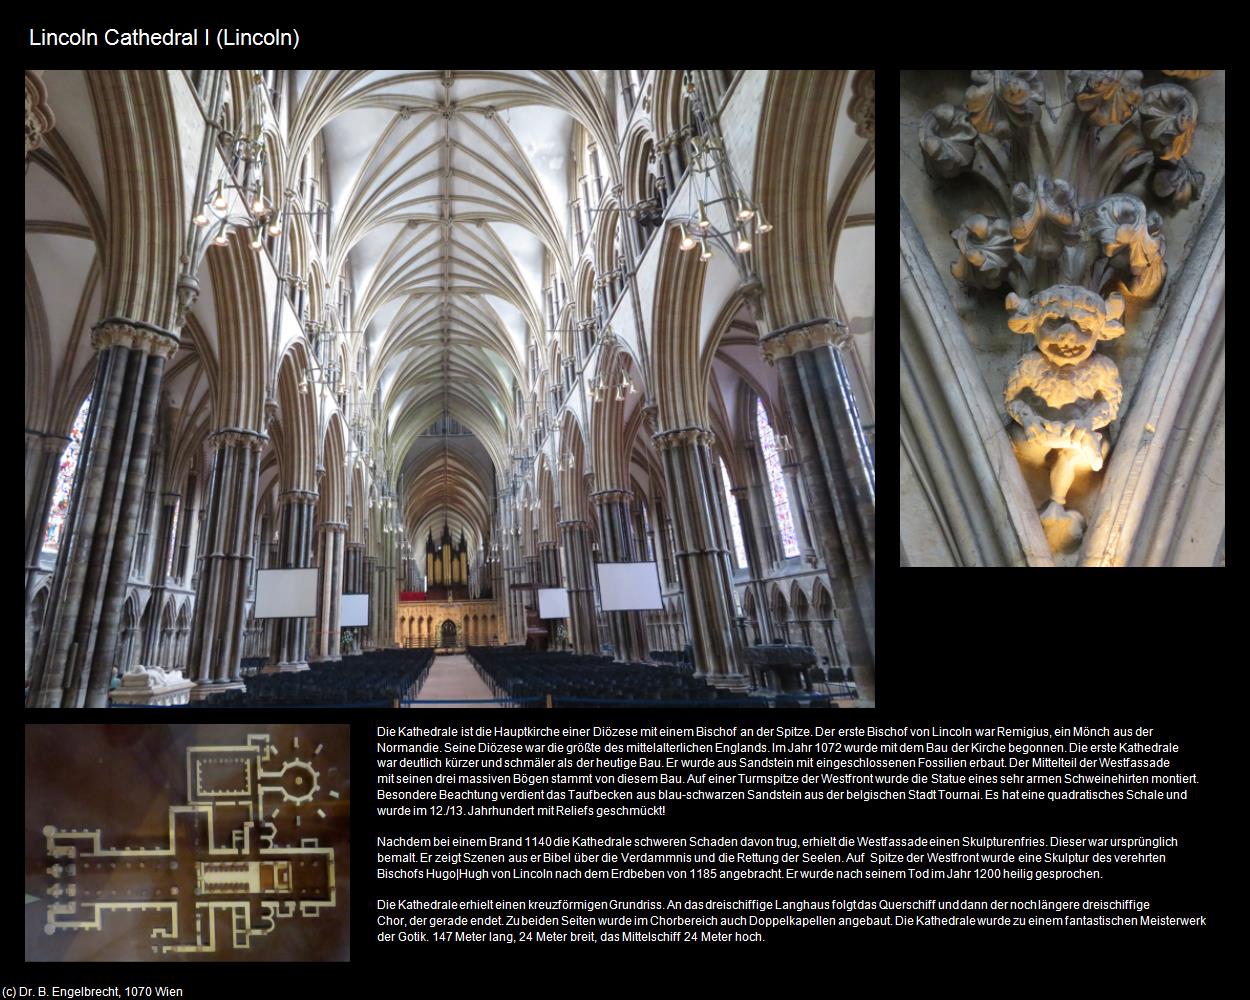 Lincoln Cathedral I  (Lincoln, England) in Kulturatlas-ENGLAND und WALES